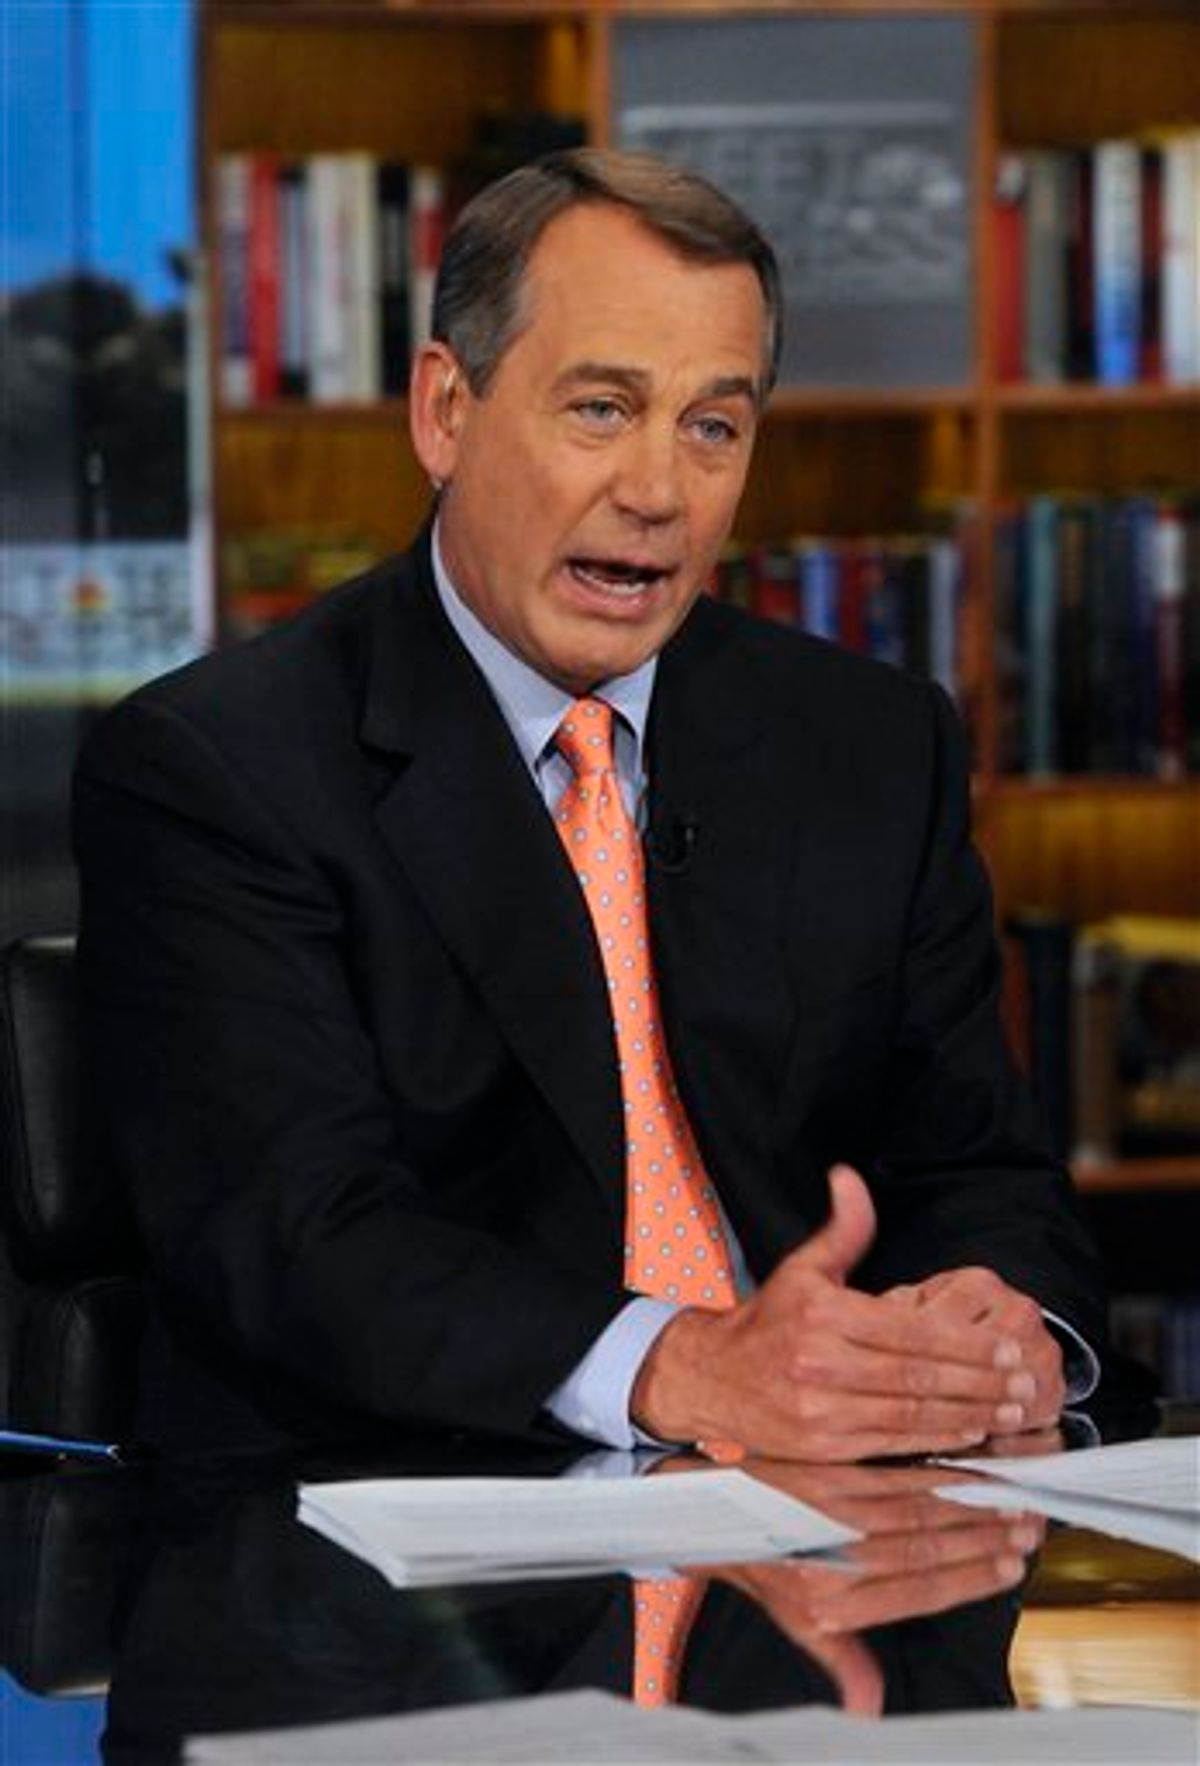 In this photo released by NBC House Speaker Rep. John Boehner, R-Ohio, speaks about the 2012 budget on NBC's "Meet the Press" in Washington Sunday, Feb. 13, 2011. Boehner said he wants President Barack Obama to support Republican efforts to make deep cuts in this year's budget as a down payment in the effort to attack soaring deficits. He sent a letter to the President saying the path to prosperity for the country means "liberating our economy from the shackles of out-of-control government spending and big government."  (AP Photo/NBC, William B. Plowman)  NO ARCHIVES. NO SALES. (AP)